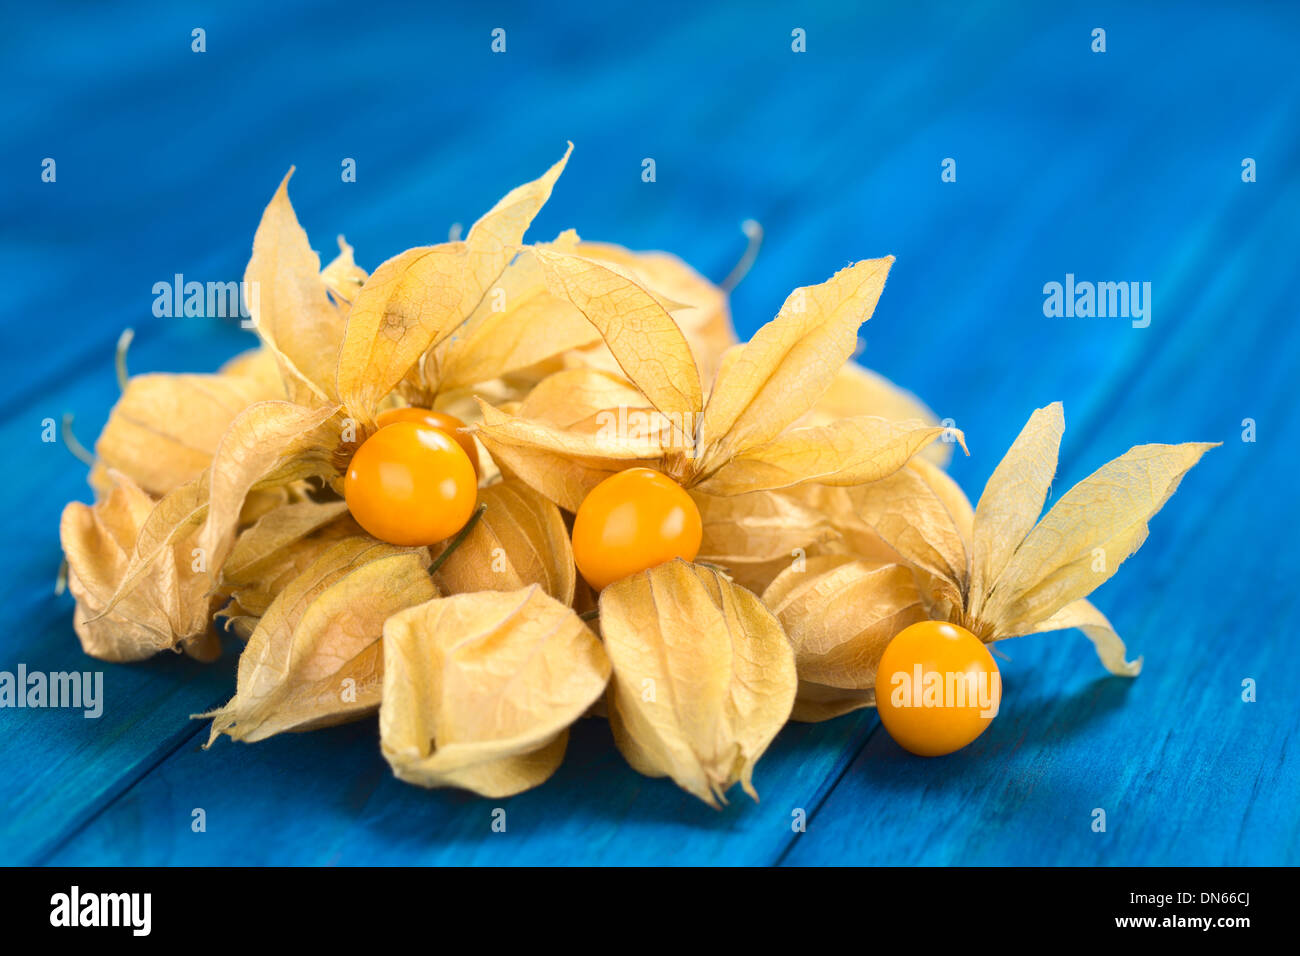 Physalis berry fruits (lat. Physalis peruviana) with husk on blue wood (Selective Focus, Focus on the open physalis berries) Stock Photo